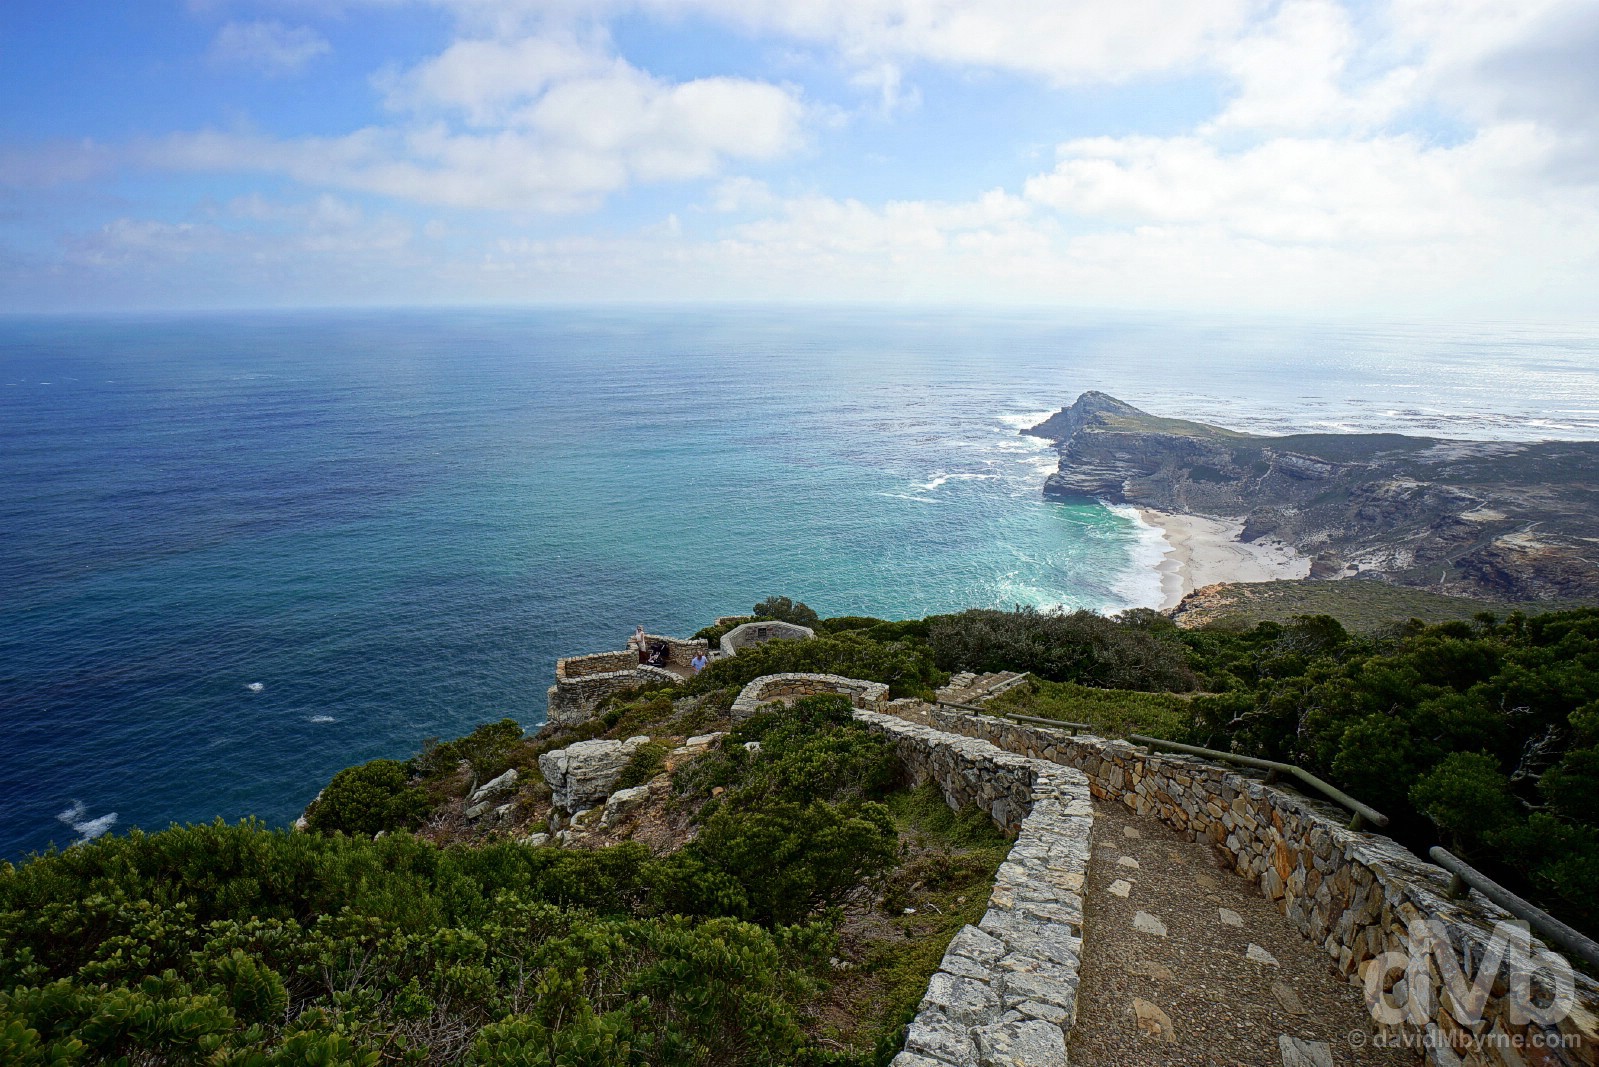 Scenery at Cape Point, Cape Peninsula, Western Cape, South Africa. February 17, 2017.